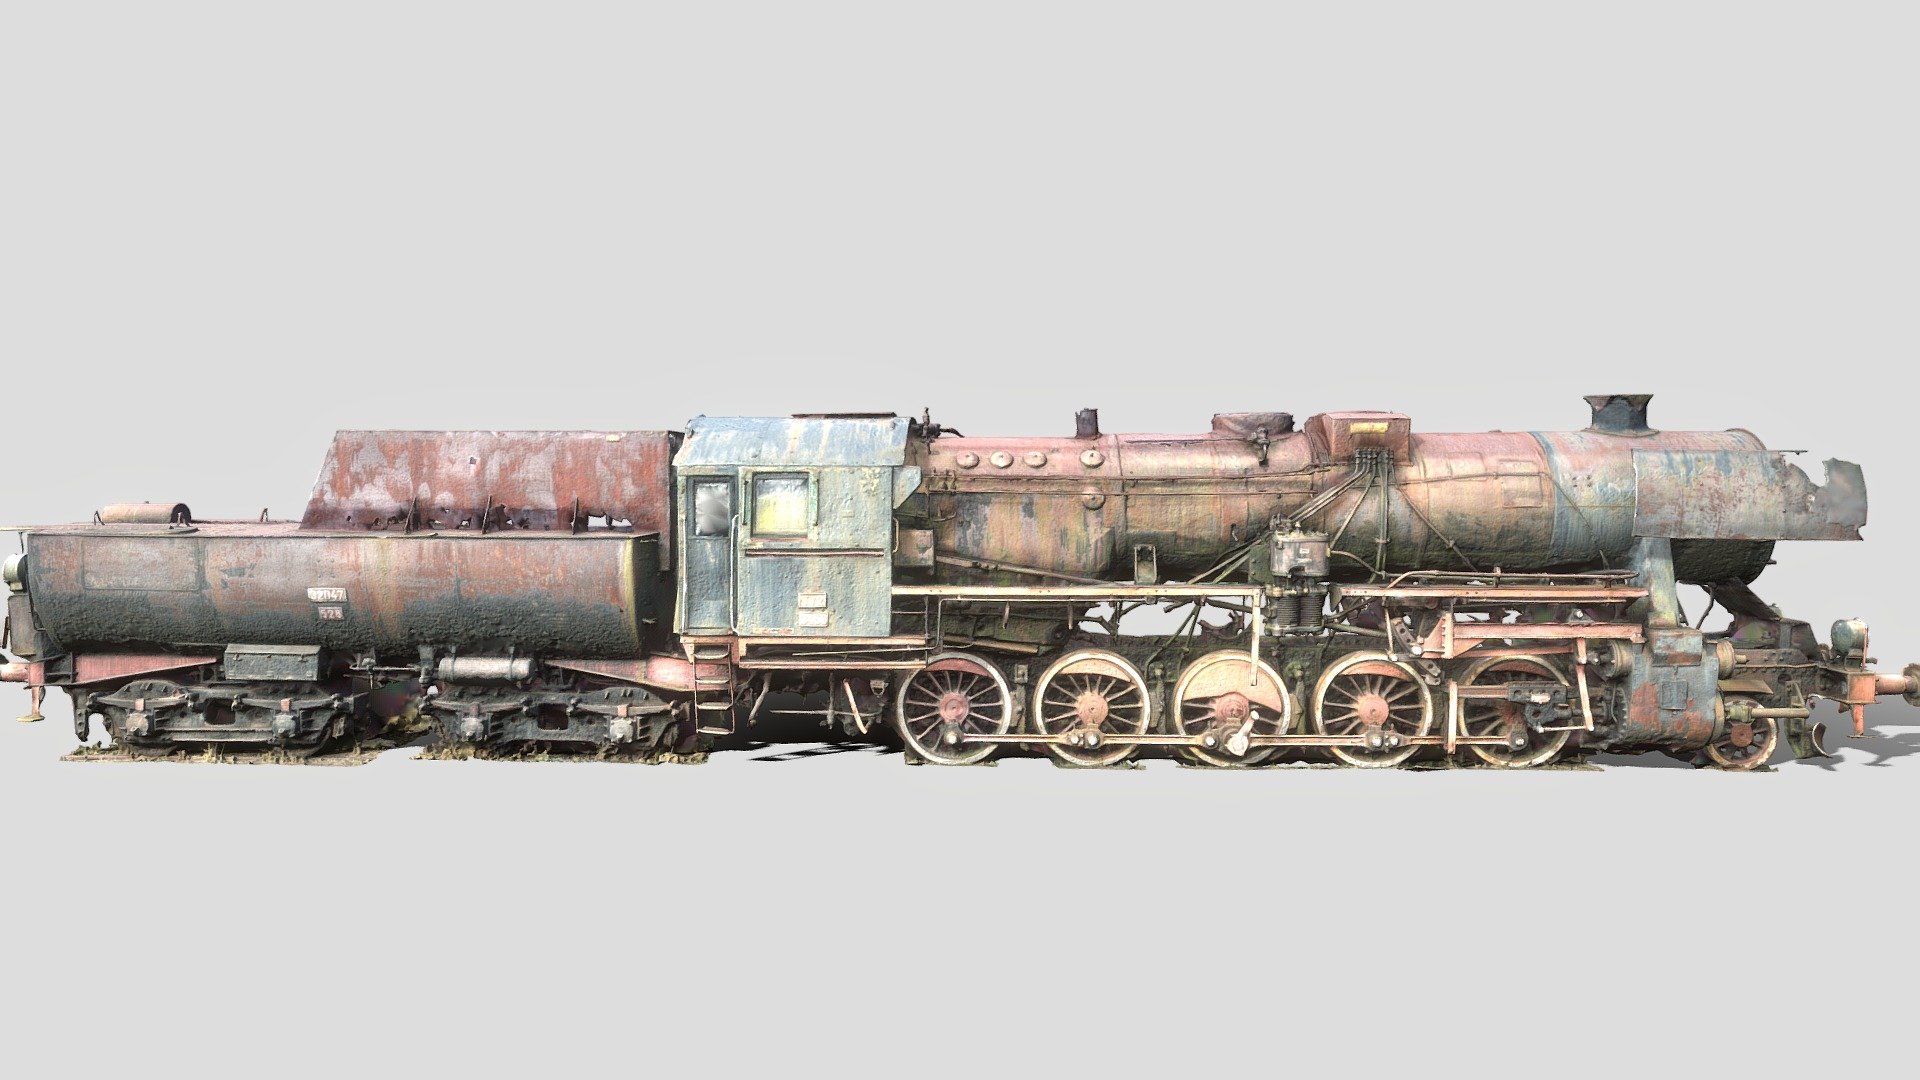 A photorealistic model of an old rusty steam locomotive. Scanned during my eastern Europe trip using my drone and Sony A7. The model contains




4 x 8K textures

Diffuse, normal and roughness

Diffuse texture is delighted for interactive lighting

Blender Asset Browser ready - blend file with model setup as asset is included as additional file. Just drop it in your Blender asset library and start using it

If you like this model, check out my other rusty steam locomotive scan.

Have fun! - Rusty Steam Locomotive #2 - Buy Royalty Free 3D model by Exploring Europe and Beyond (@ExploringEuropeAndBeyond) 3d model